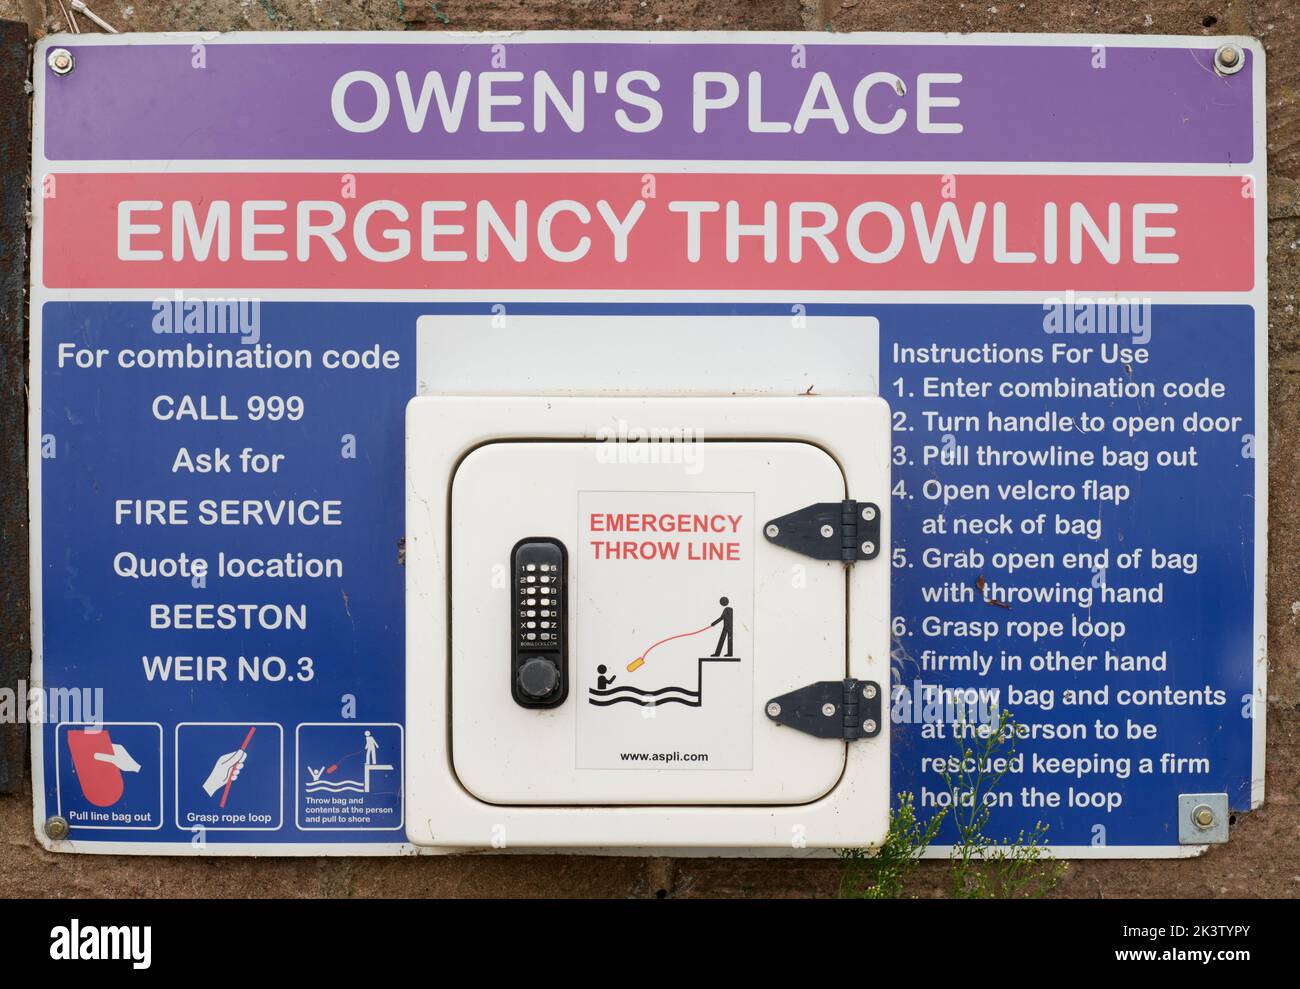 Emergeny throwline container and instructions at Owen's Place near Beeston Rylands Weir on River Trent Stock Photo